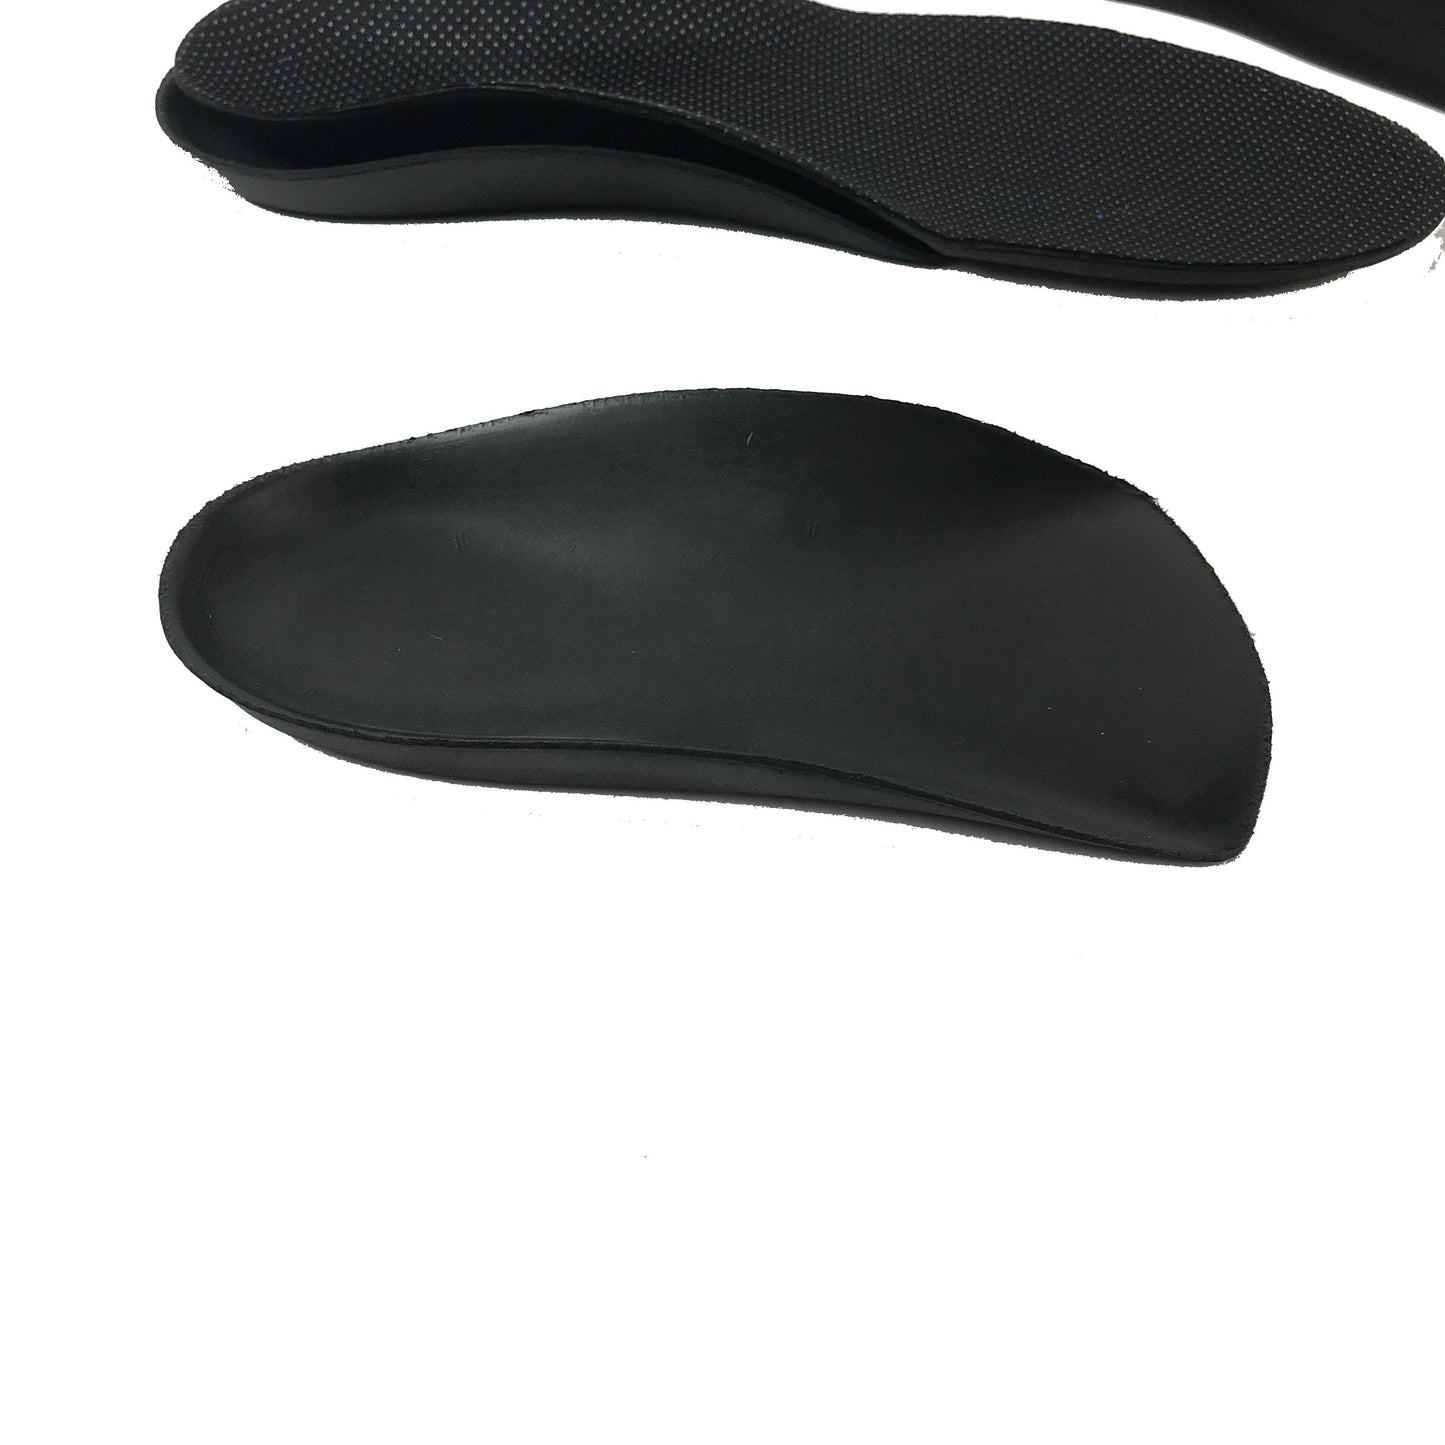 KFG Slim Insole Orthotic Base - Kicks For Gents - Insole - Insole, MADE IN USA